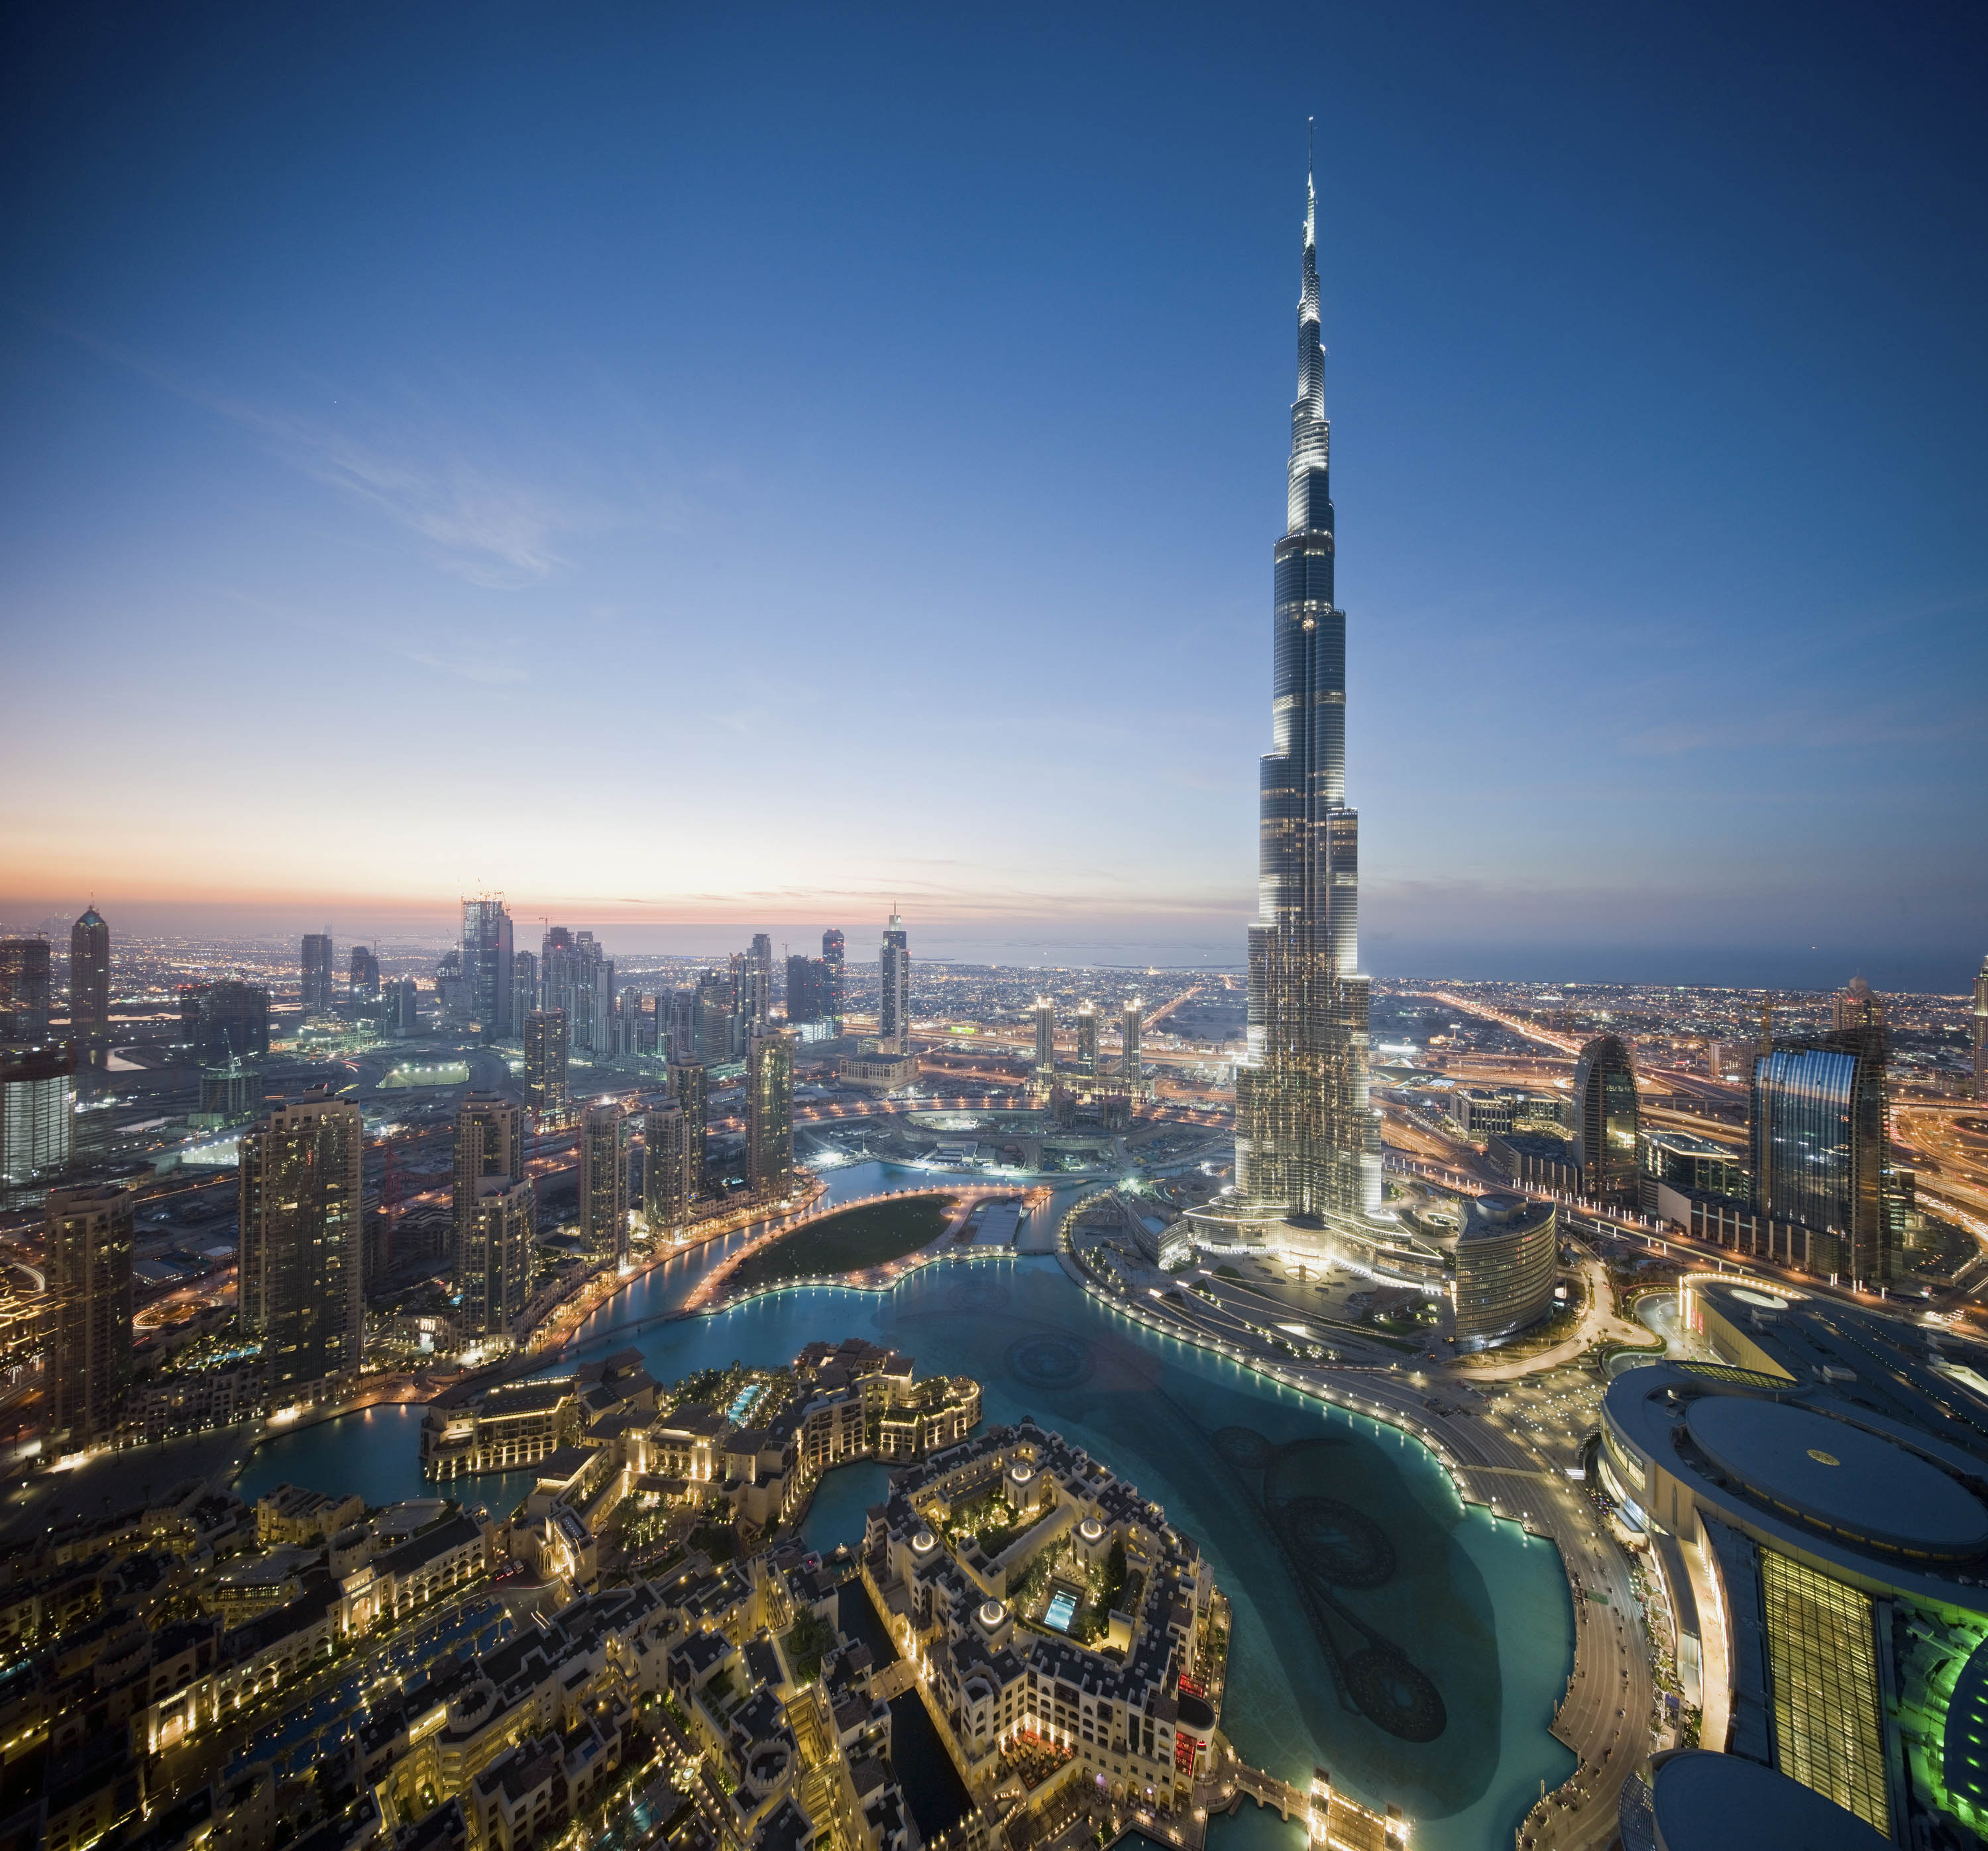 At 830 m from base to tip, Dubai’s Burj Khalifa is the world’s tallest building—for now. (Iwan Baan)